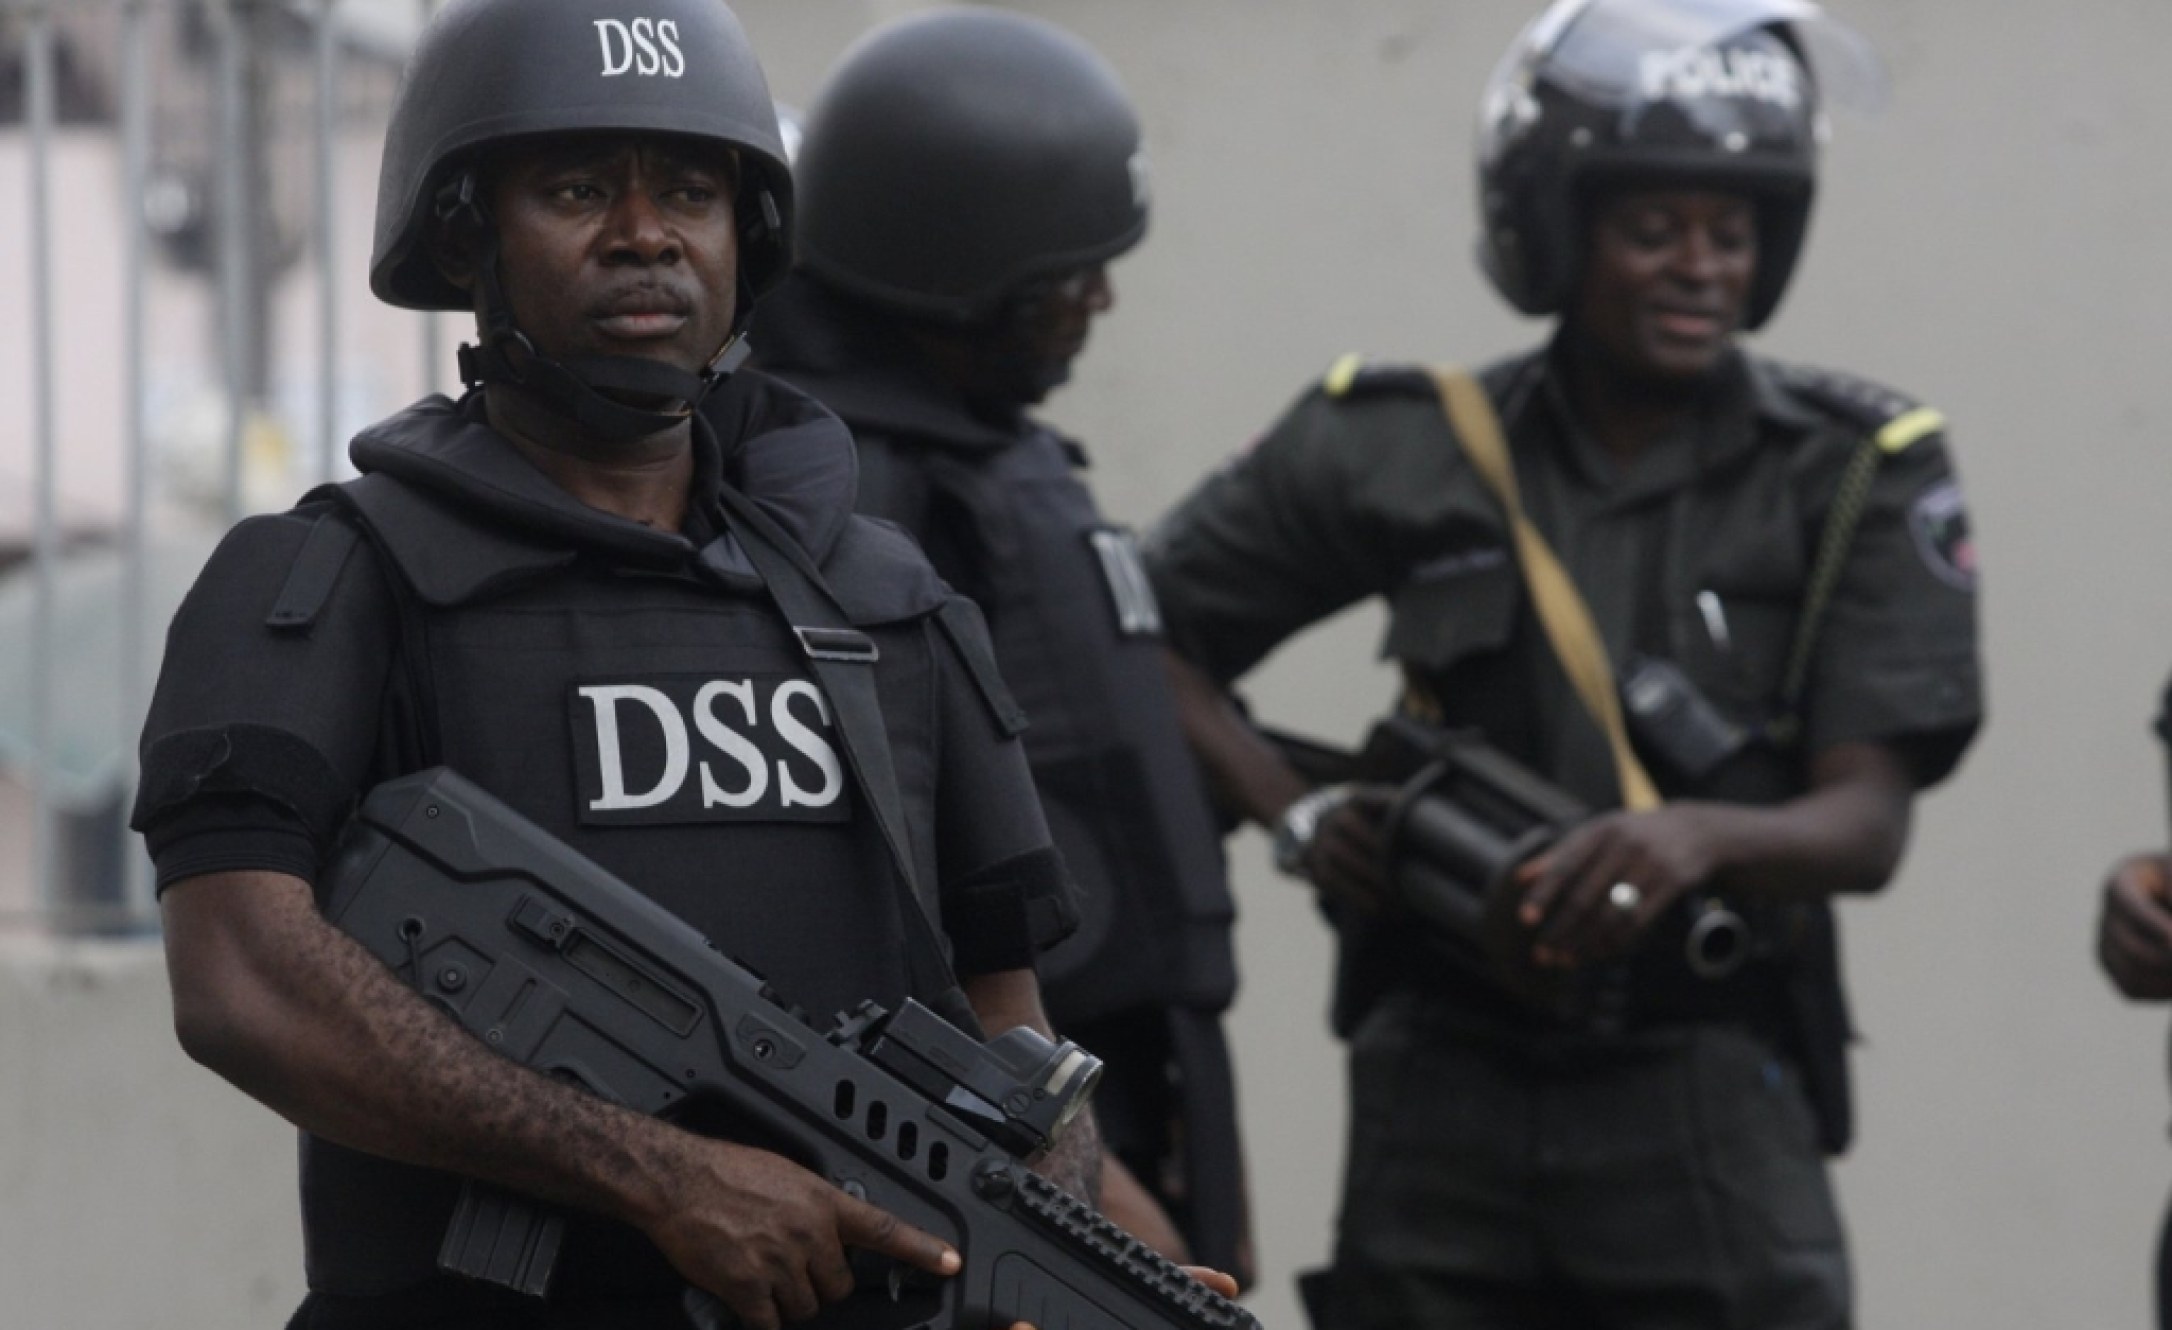 nigeria-sss-nigeria-s-security-agency-notorious-for-disobeying-court-orders-allafrica